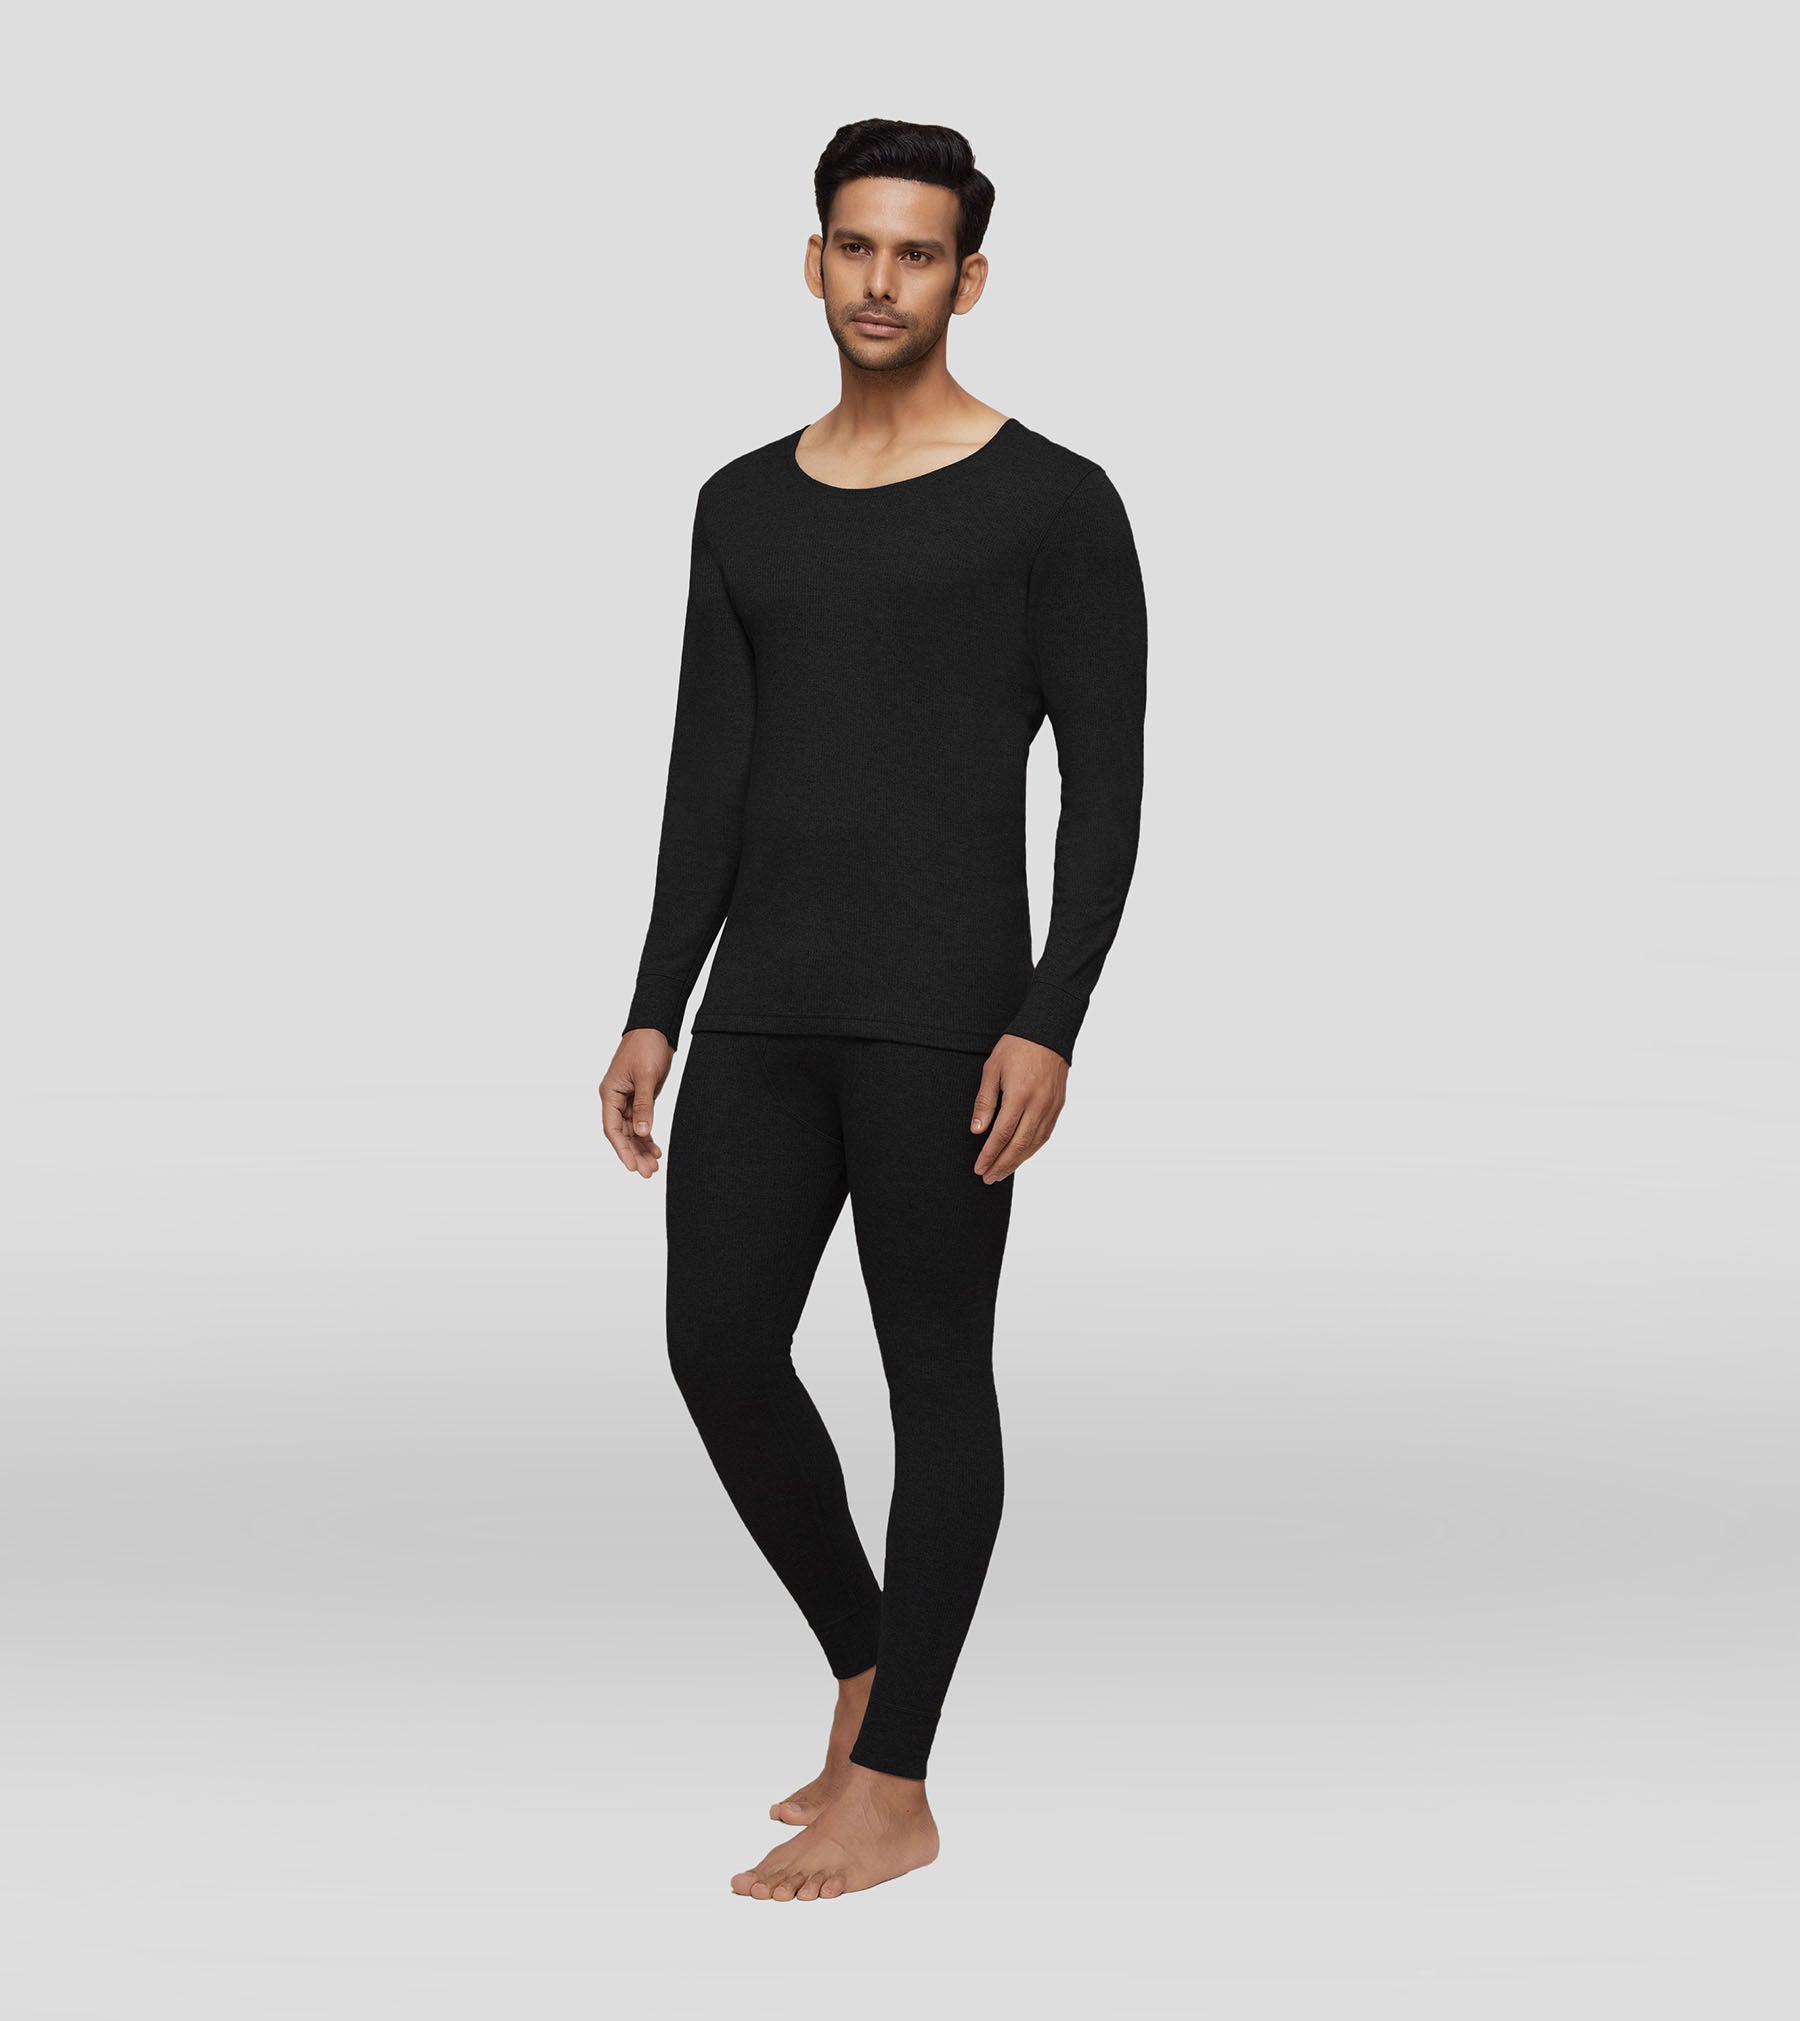 Alpine Cotton Rich Long Sleeve Thermal Set For Men Pitch Black - XYXX Mens Apparels